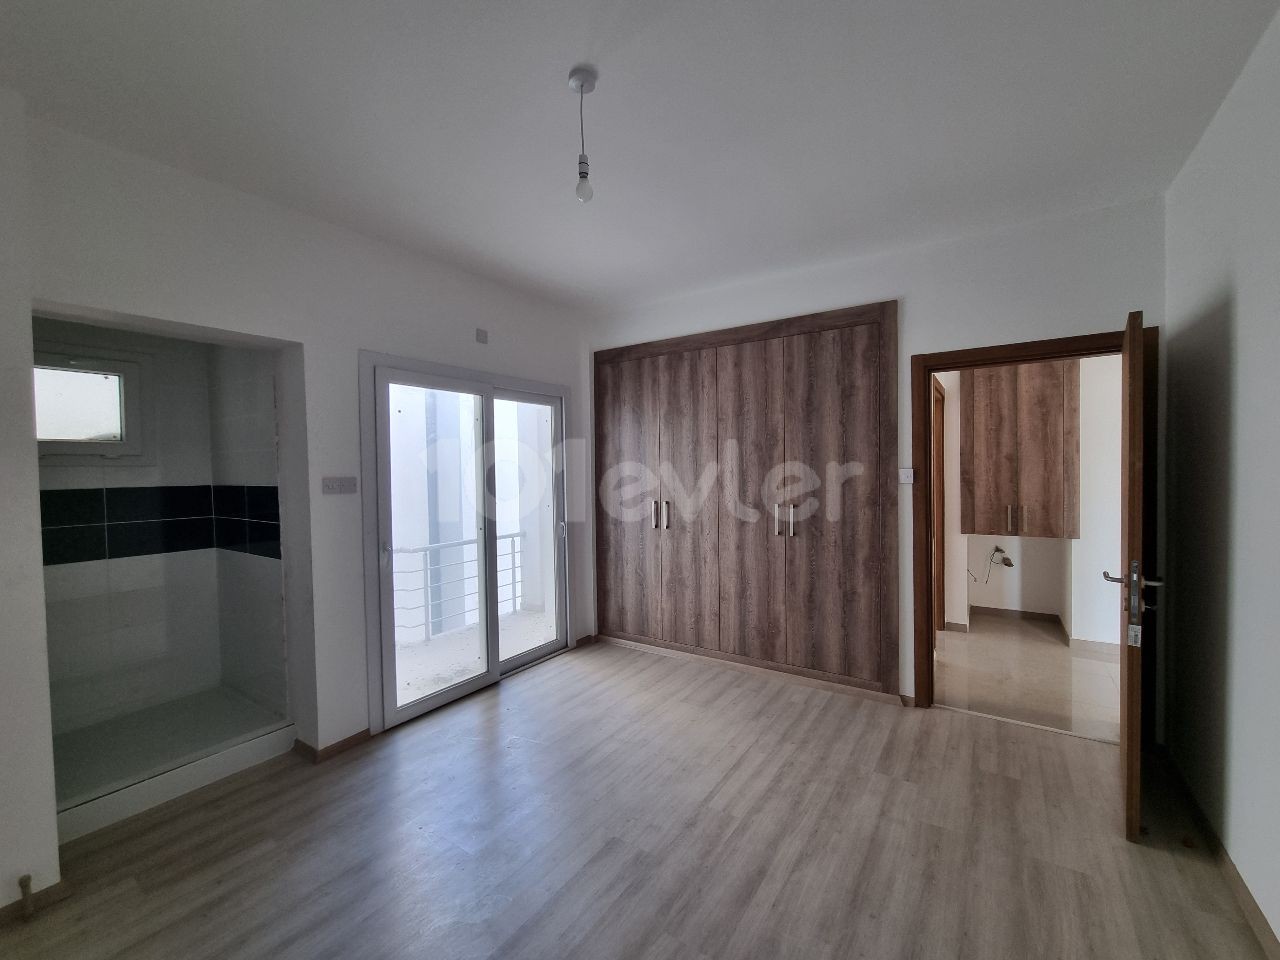 3 bedroom Turkish made flat in Gonyeli, close to the main street and markets